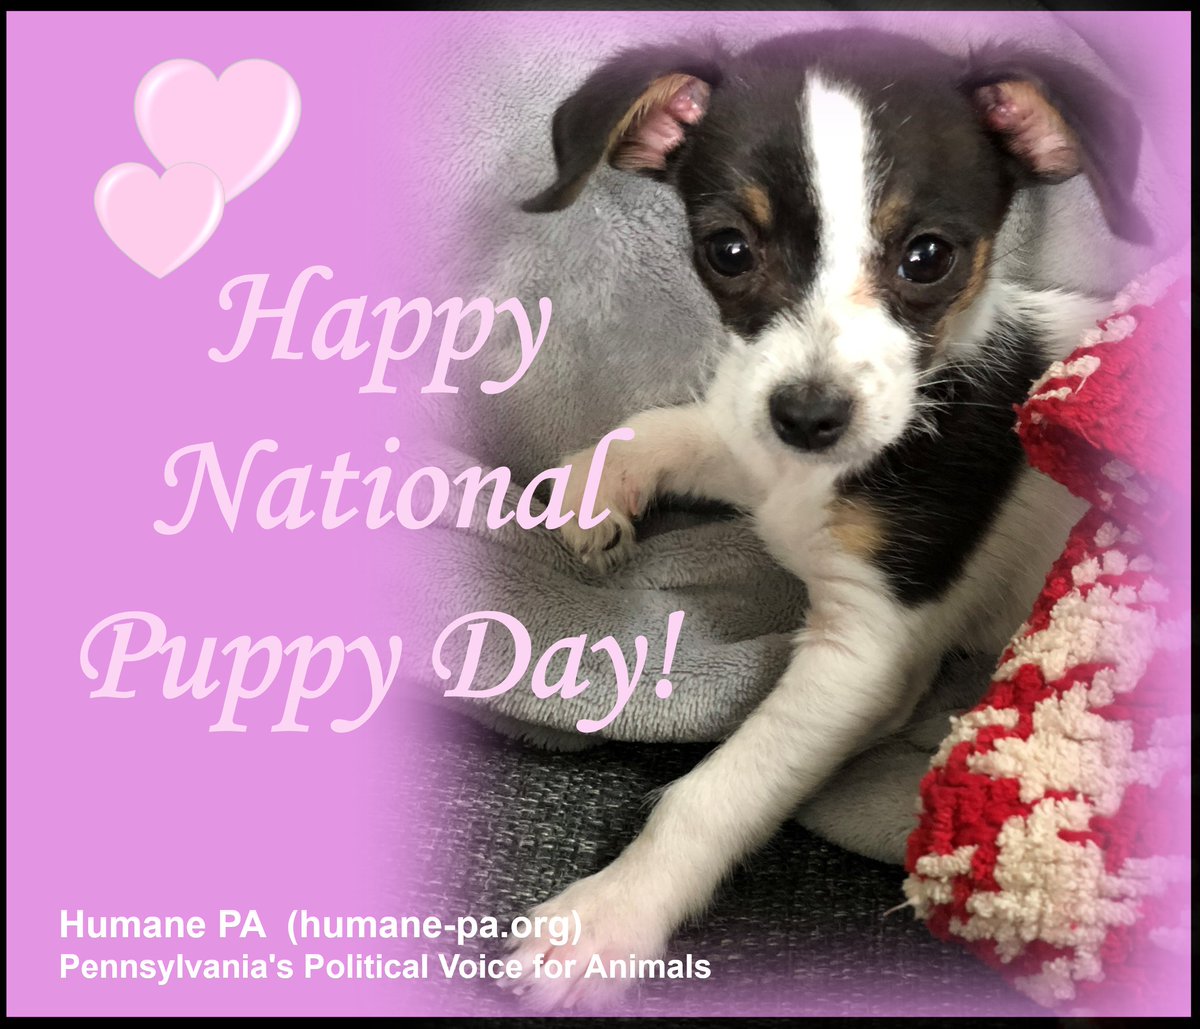 National Puppy Day celebrates the unconditional love of our four-legged friends and raises awareness about puppy mills. #AdoptDontShop #NationalPuppyDay Support #VictoriasLaw